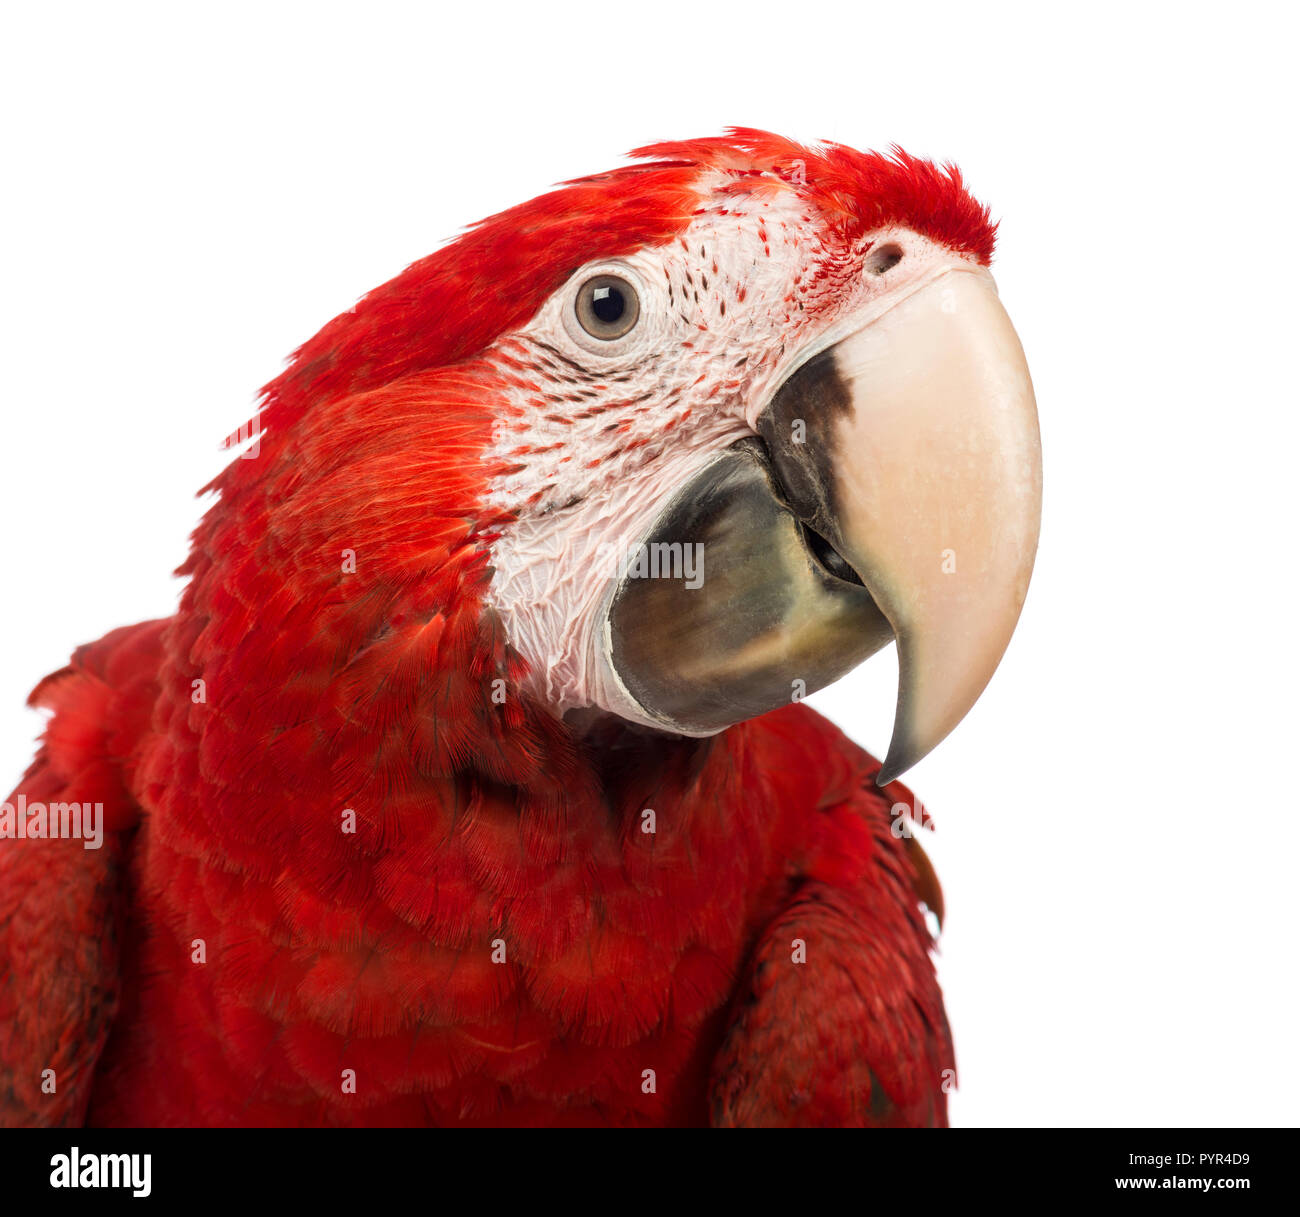 Close-up of a Green-winged Macaw, Ara chloropterus, 1 year old, in front of white background Stock Photo